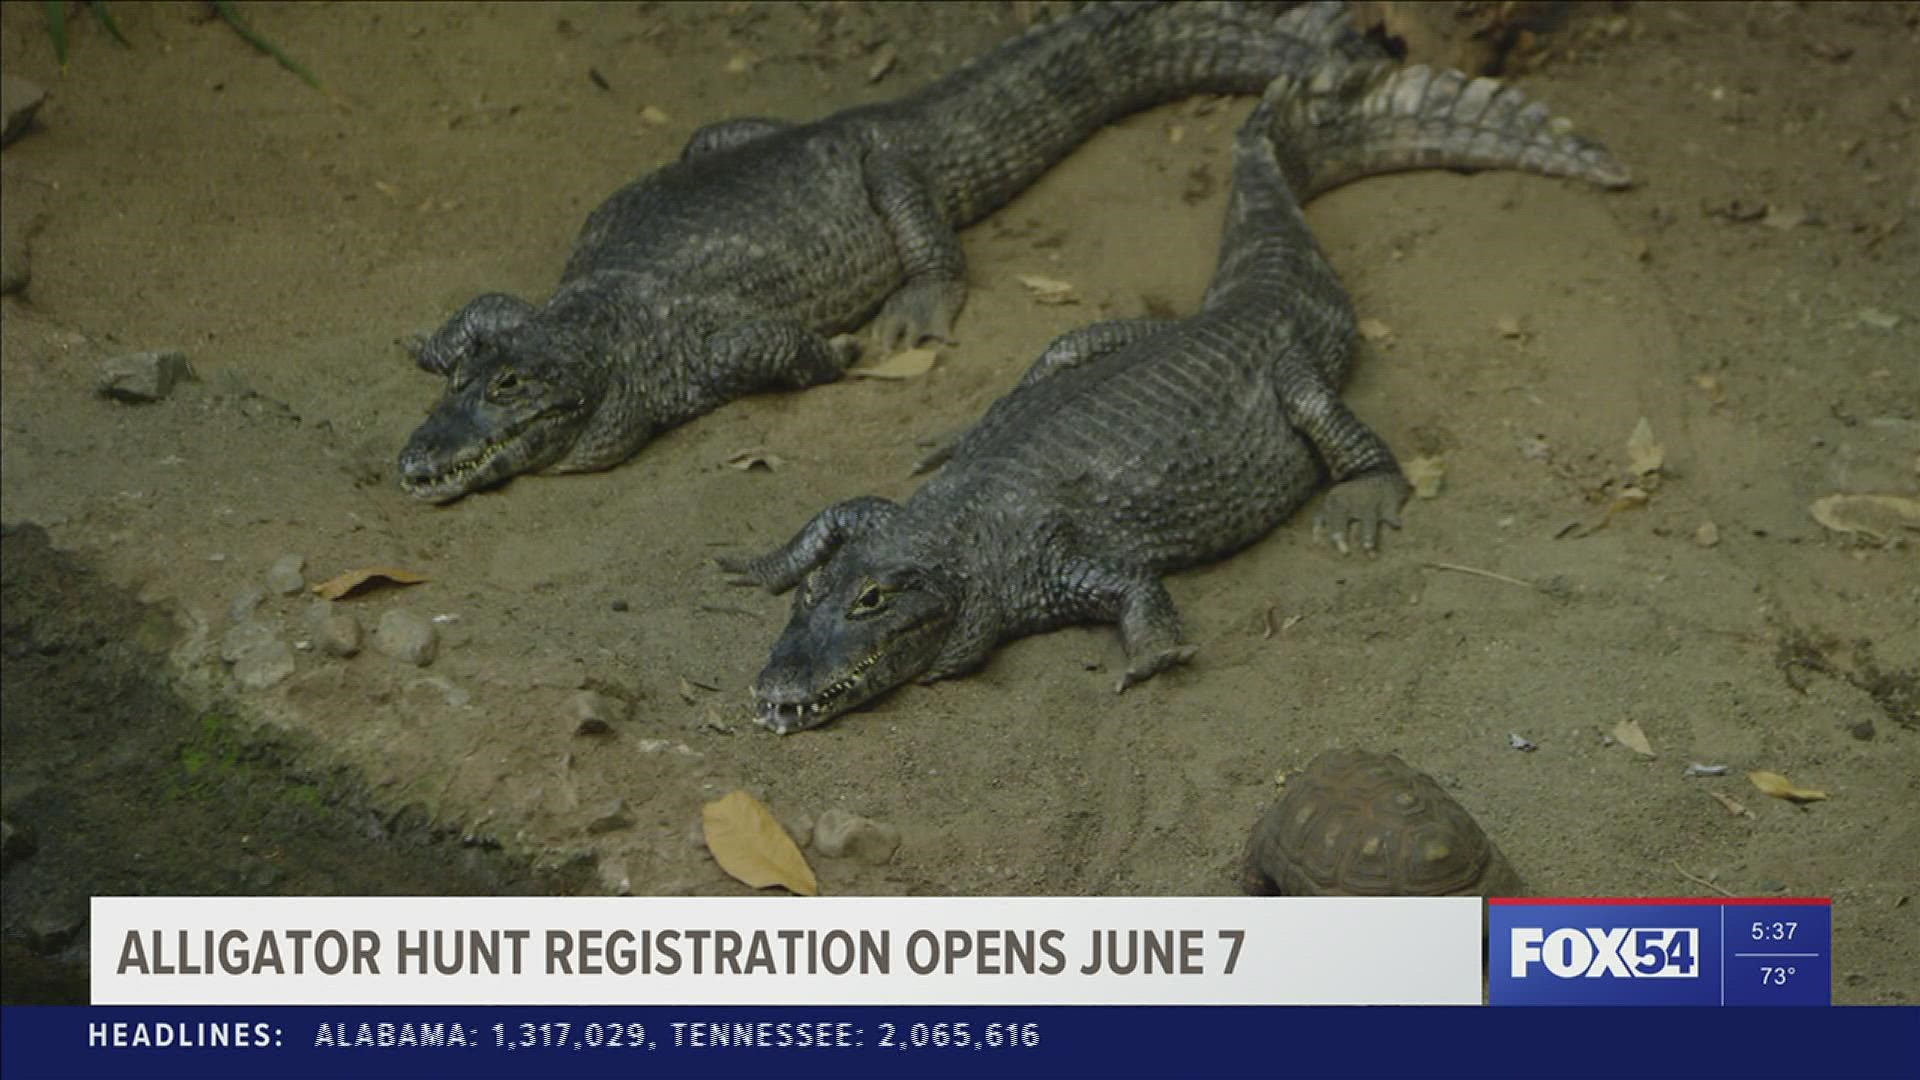 The Alabama Department of Conservation and Natural Resources will open online registration for the state’s regulated alligator hunts on June 7, 2022, at 8 a.m.